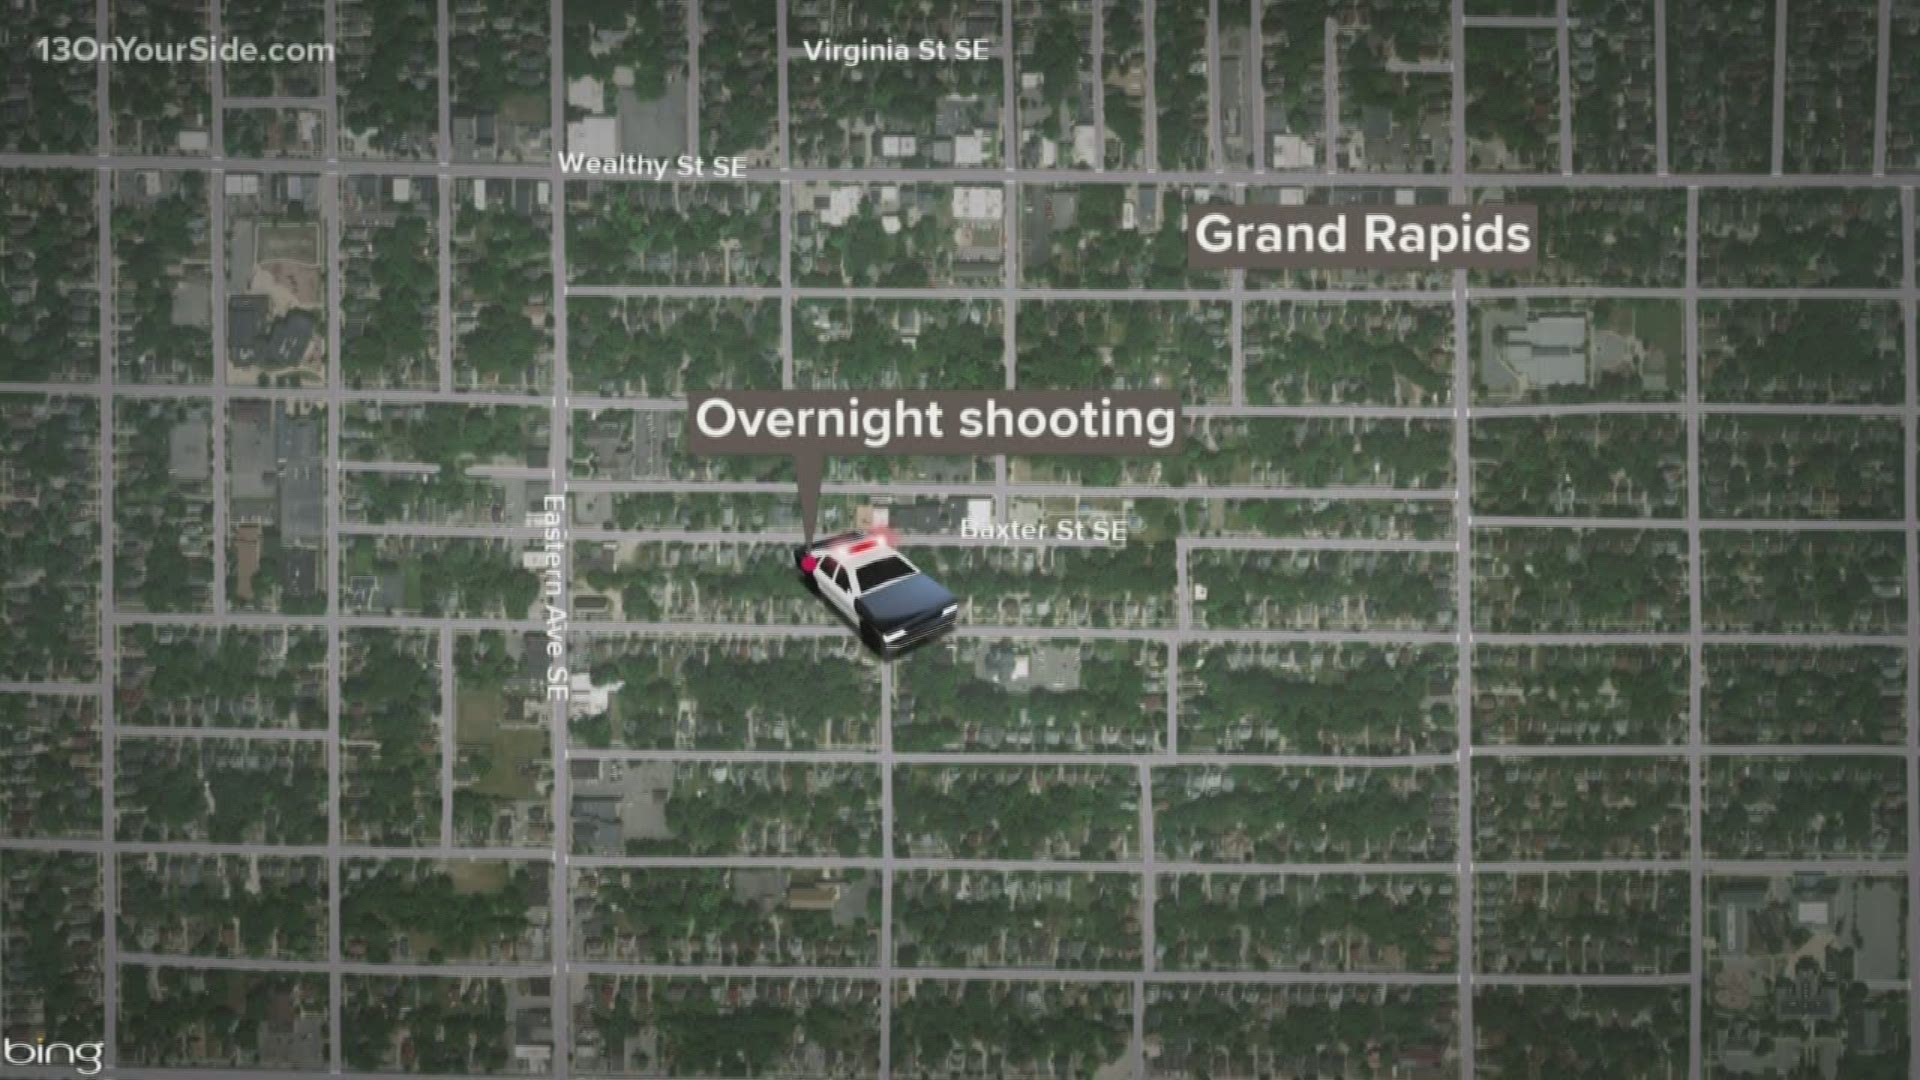 Police in Grand Rapids are investigating a shooting that left one person injured on the city's southeast side. One person was hit in the incident, but suffered non-life threatening injuries. Police are still searching for the suspect involved in the incident. Information about the suspect was not provided.